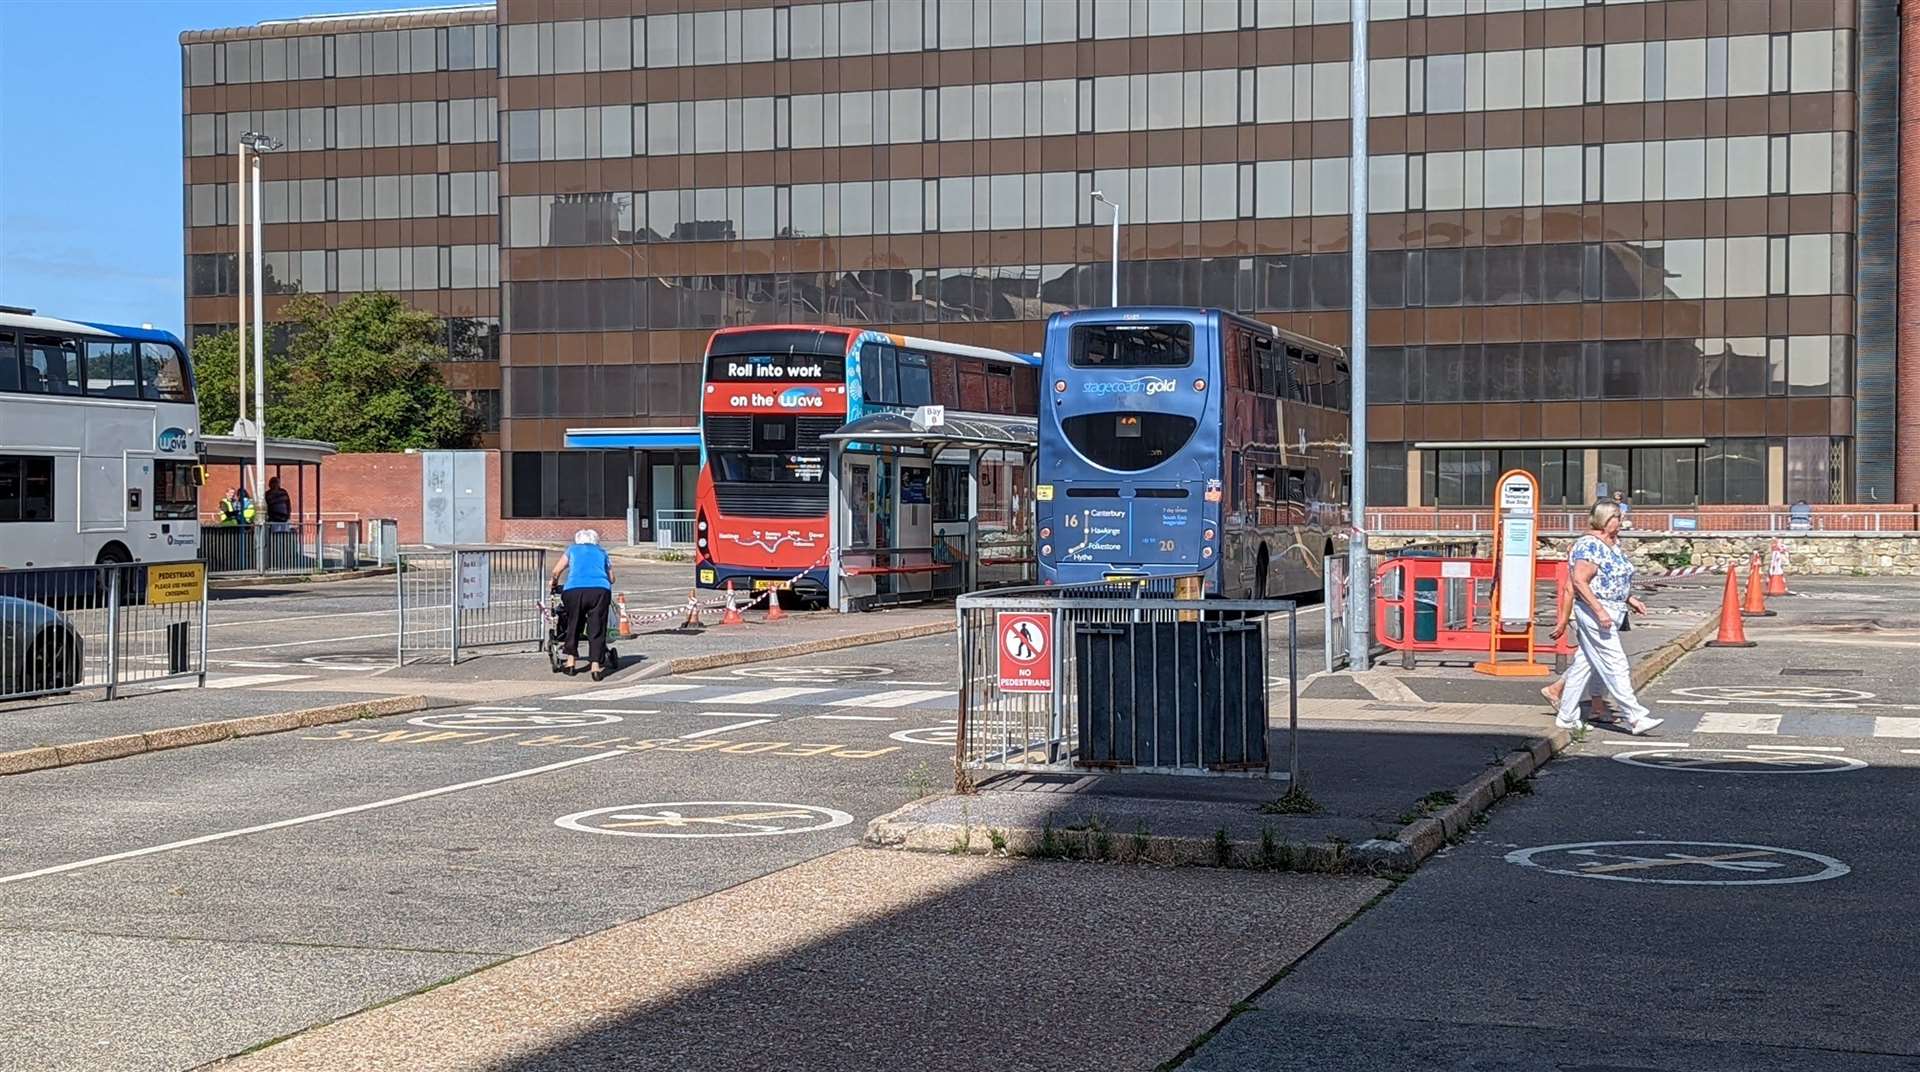 The existing Folkestone bus station in Bouverie Square